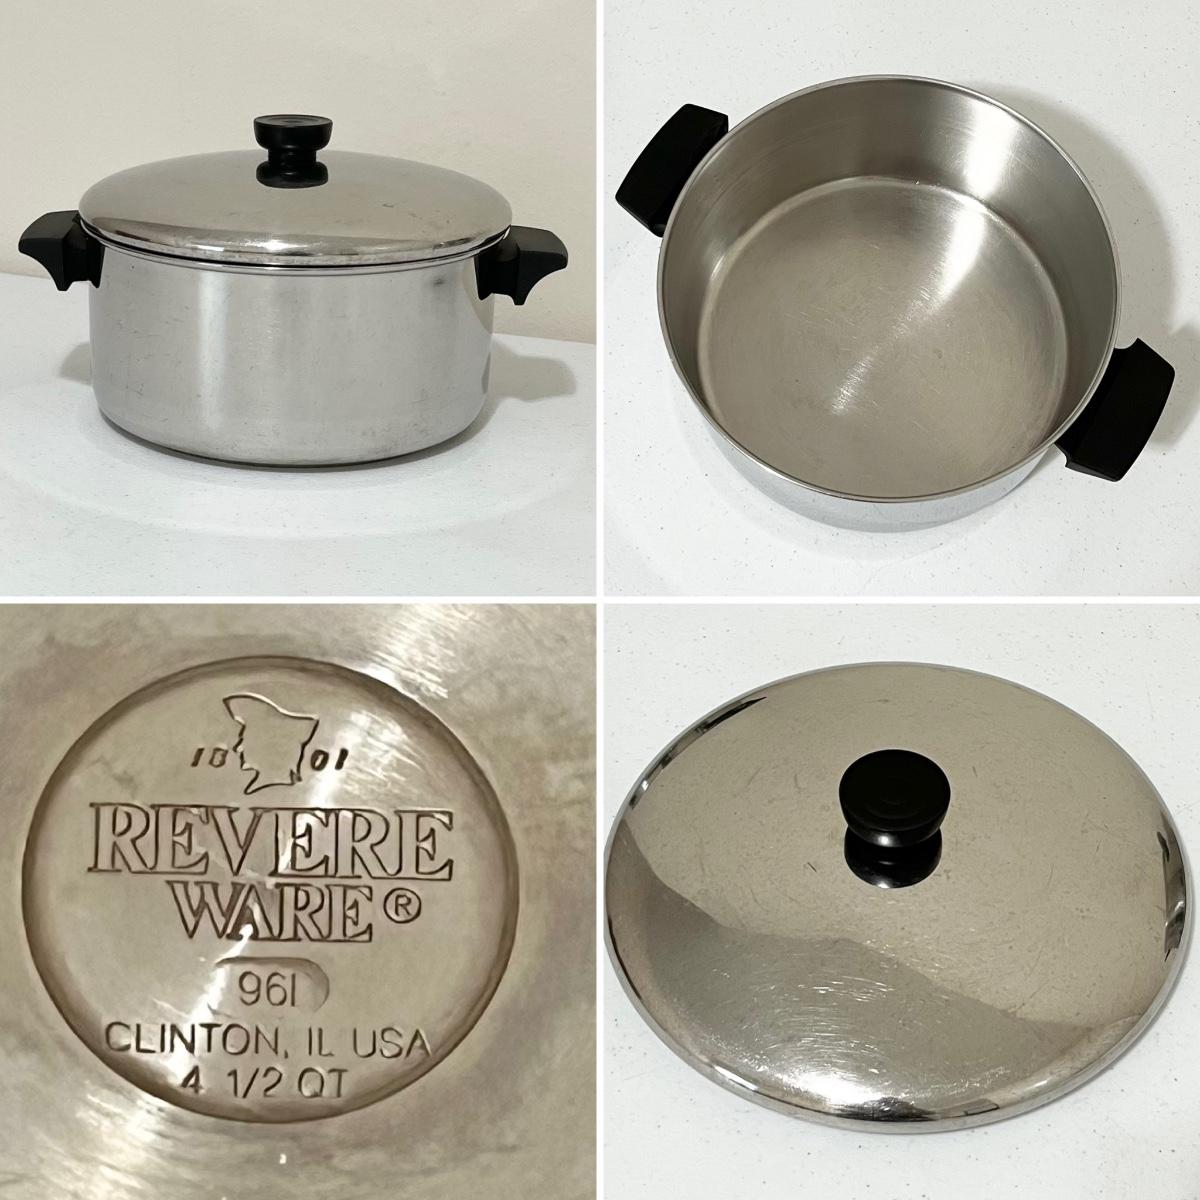 Make your Revere Ware look like new - Revere Ware Parts